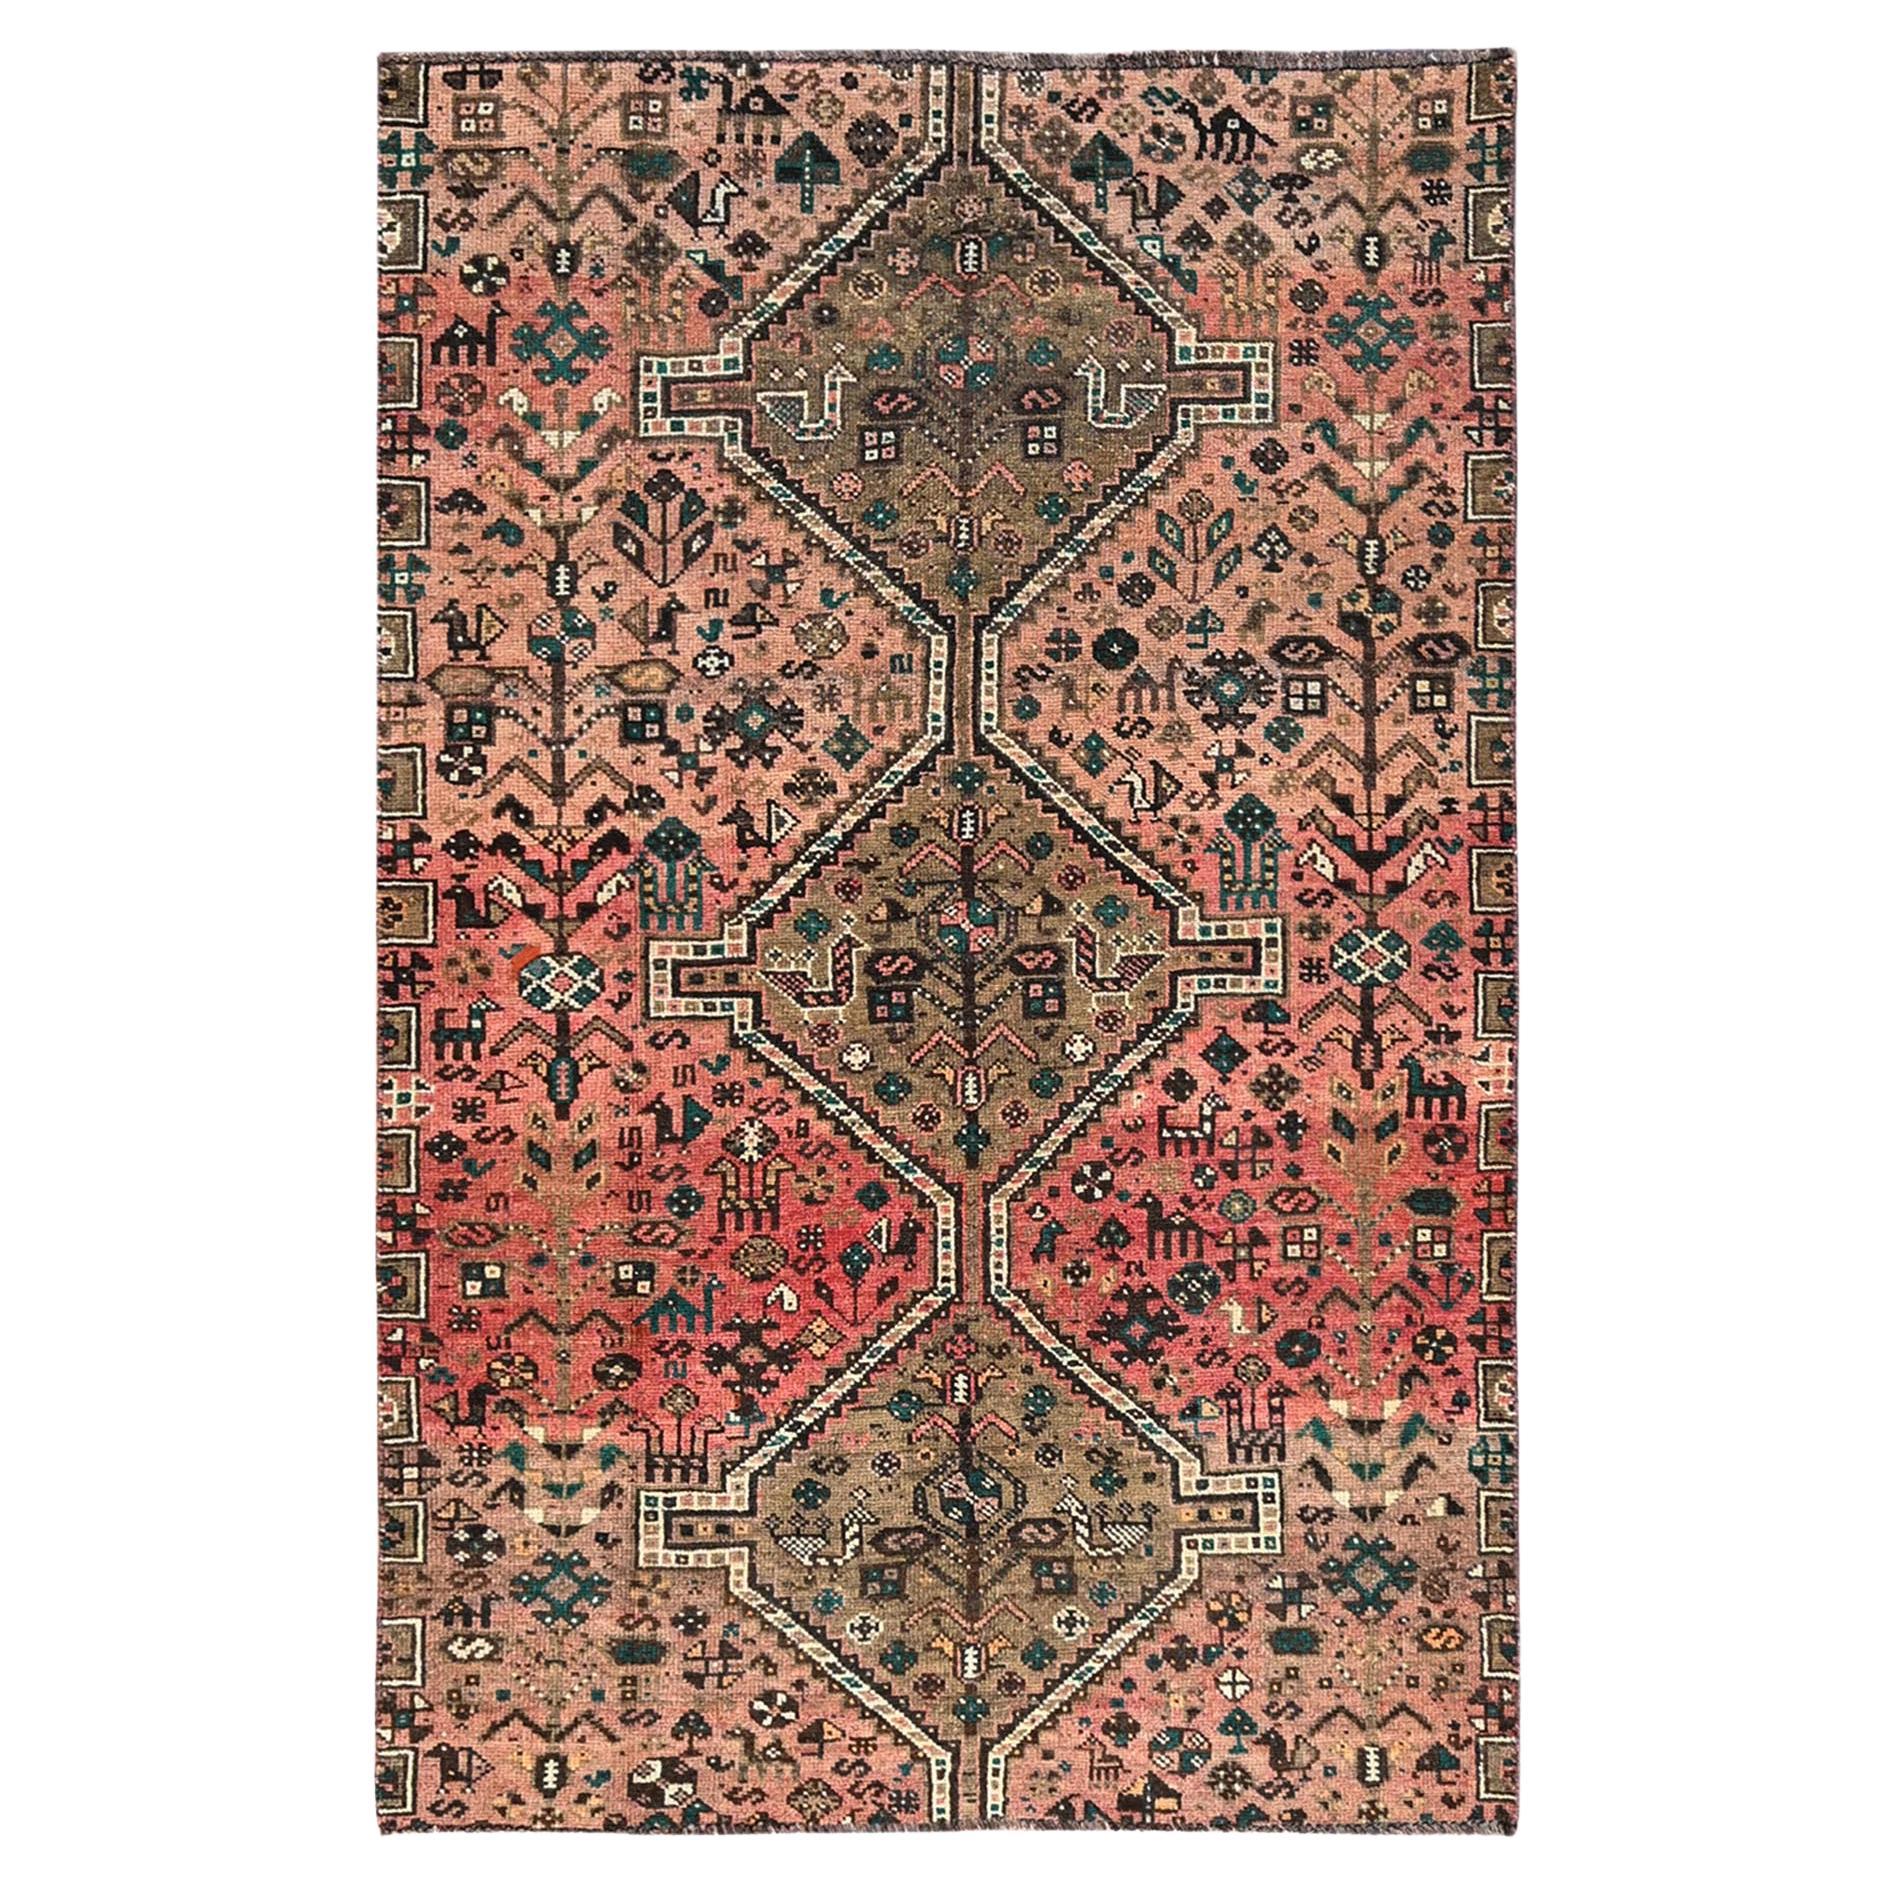 Acorn Brown Old Persian Shiraz Abrash Evenly Worn Pure Wool Clean Distressed Rug